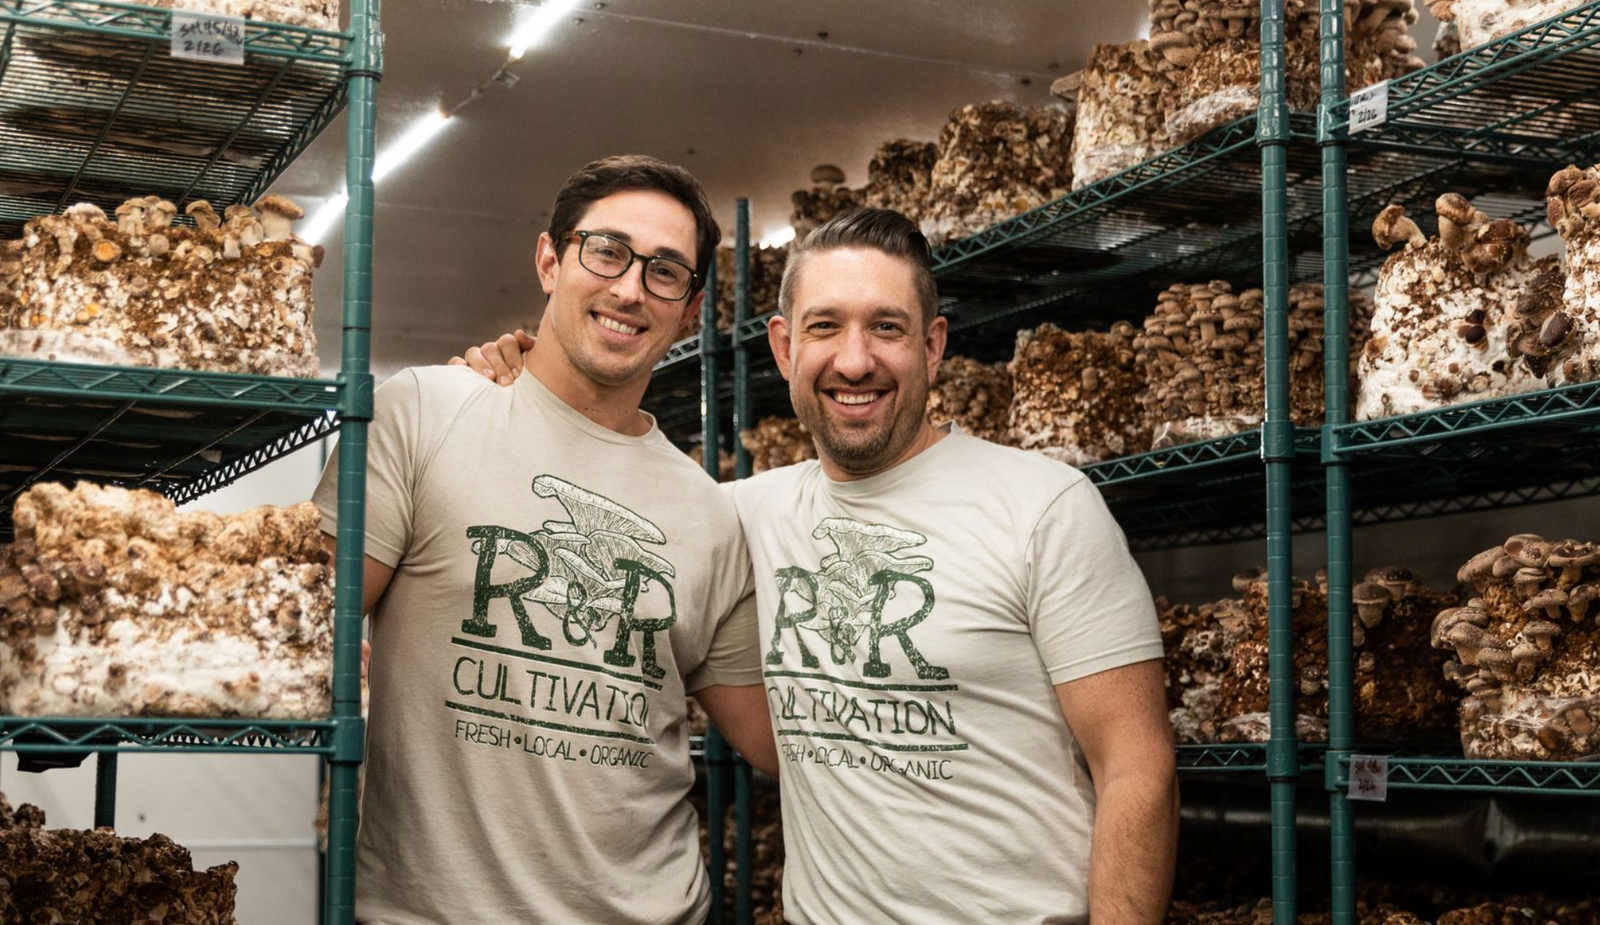 Fresh Minnesota Mushrooms - R&R Cultivation featured in Go Solo